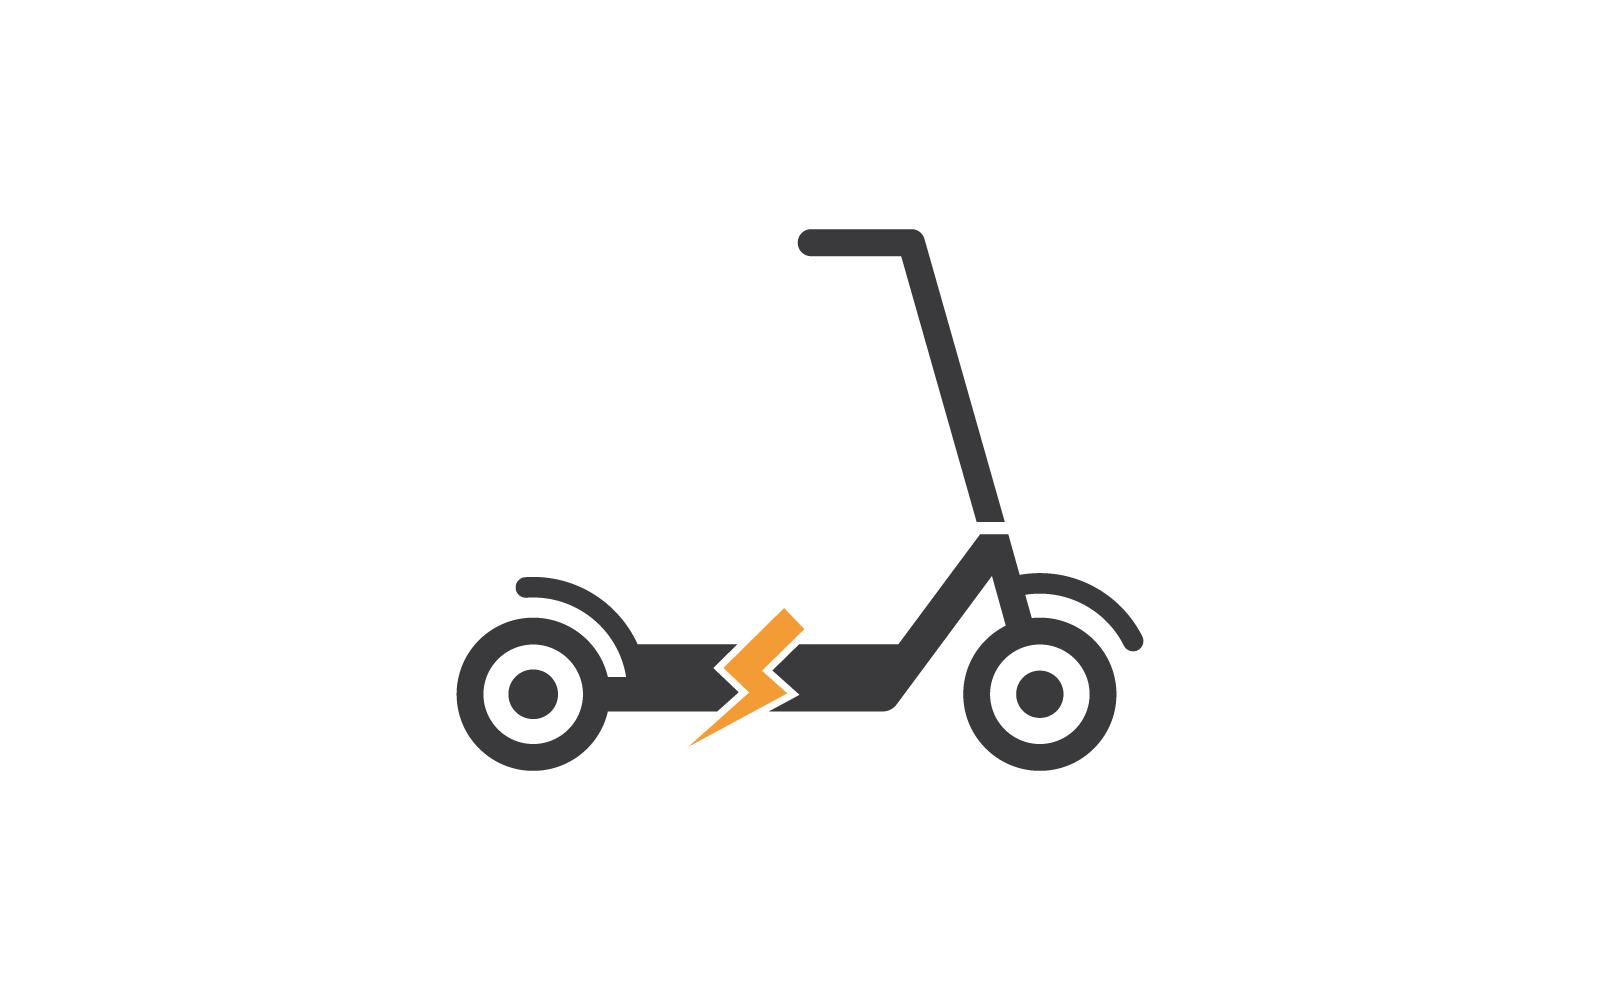 Scooter logo icon vector flat design template